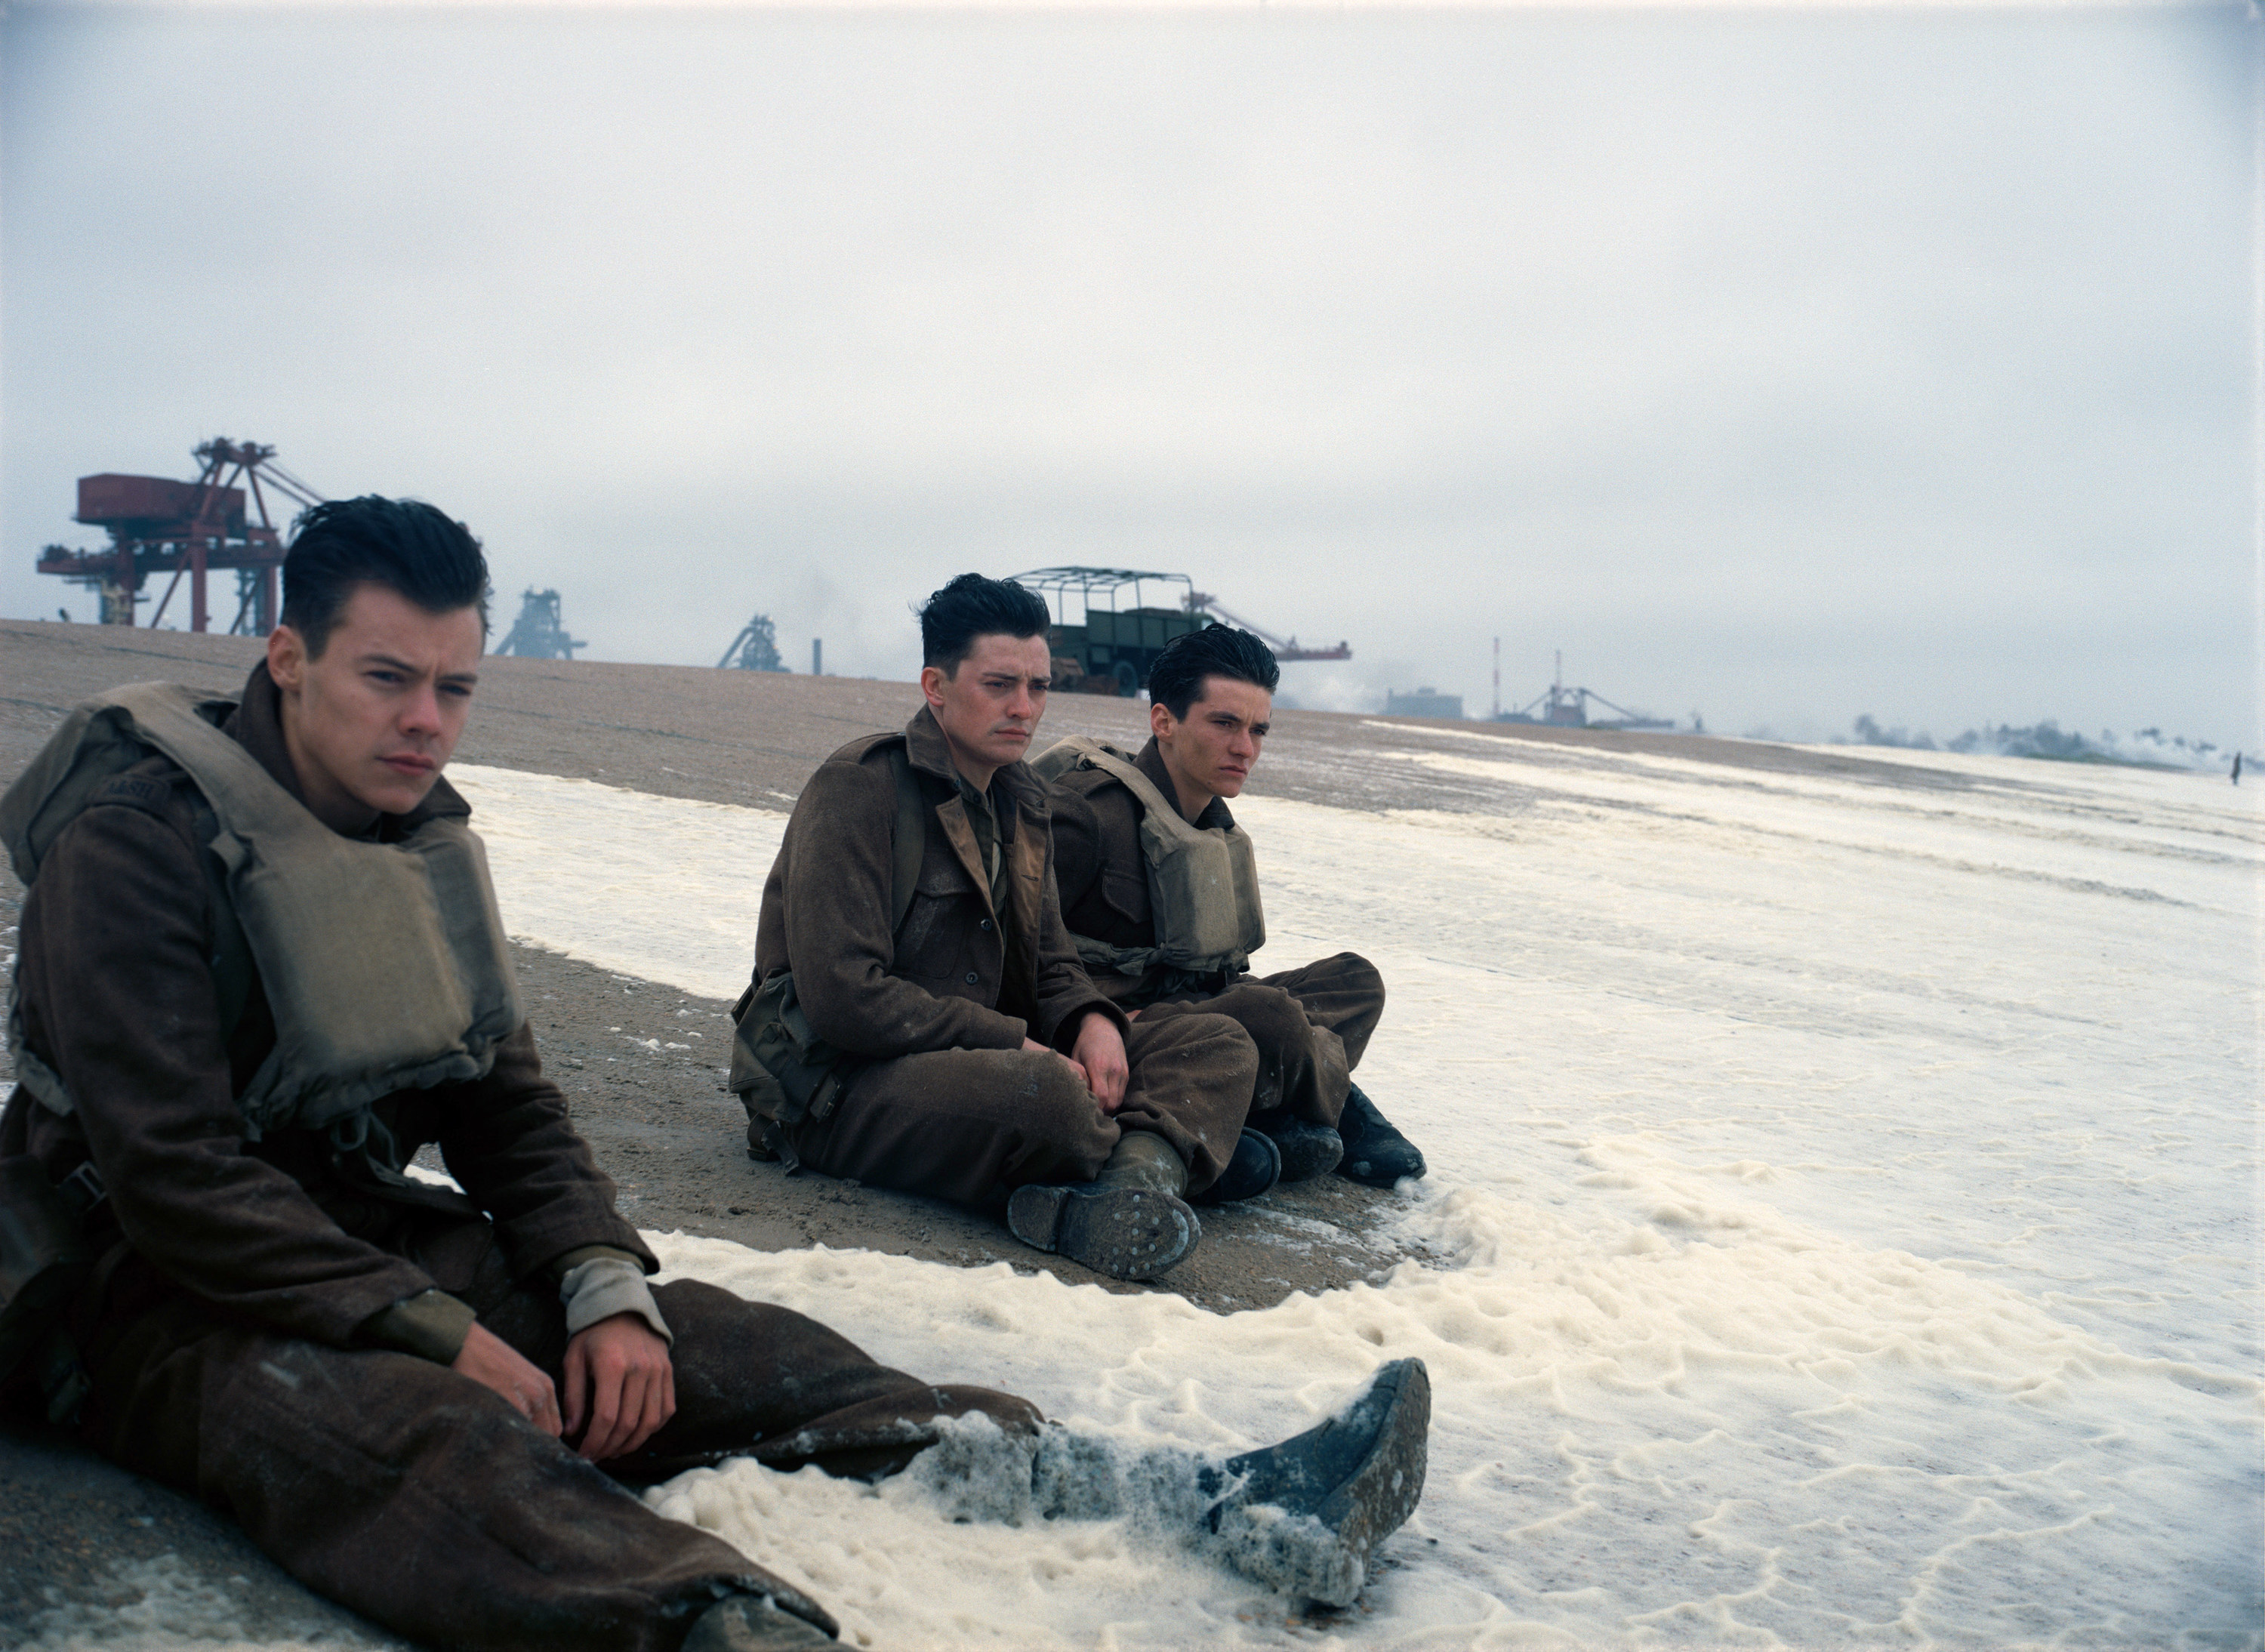 Harry Stiles, Aneurin Barnard, and Fionn Whitehead sit on a beach toghether in the waves